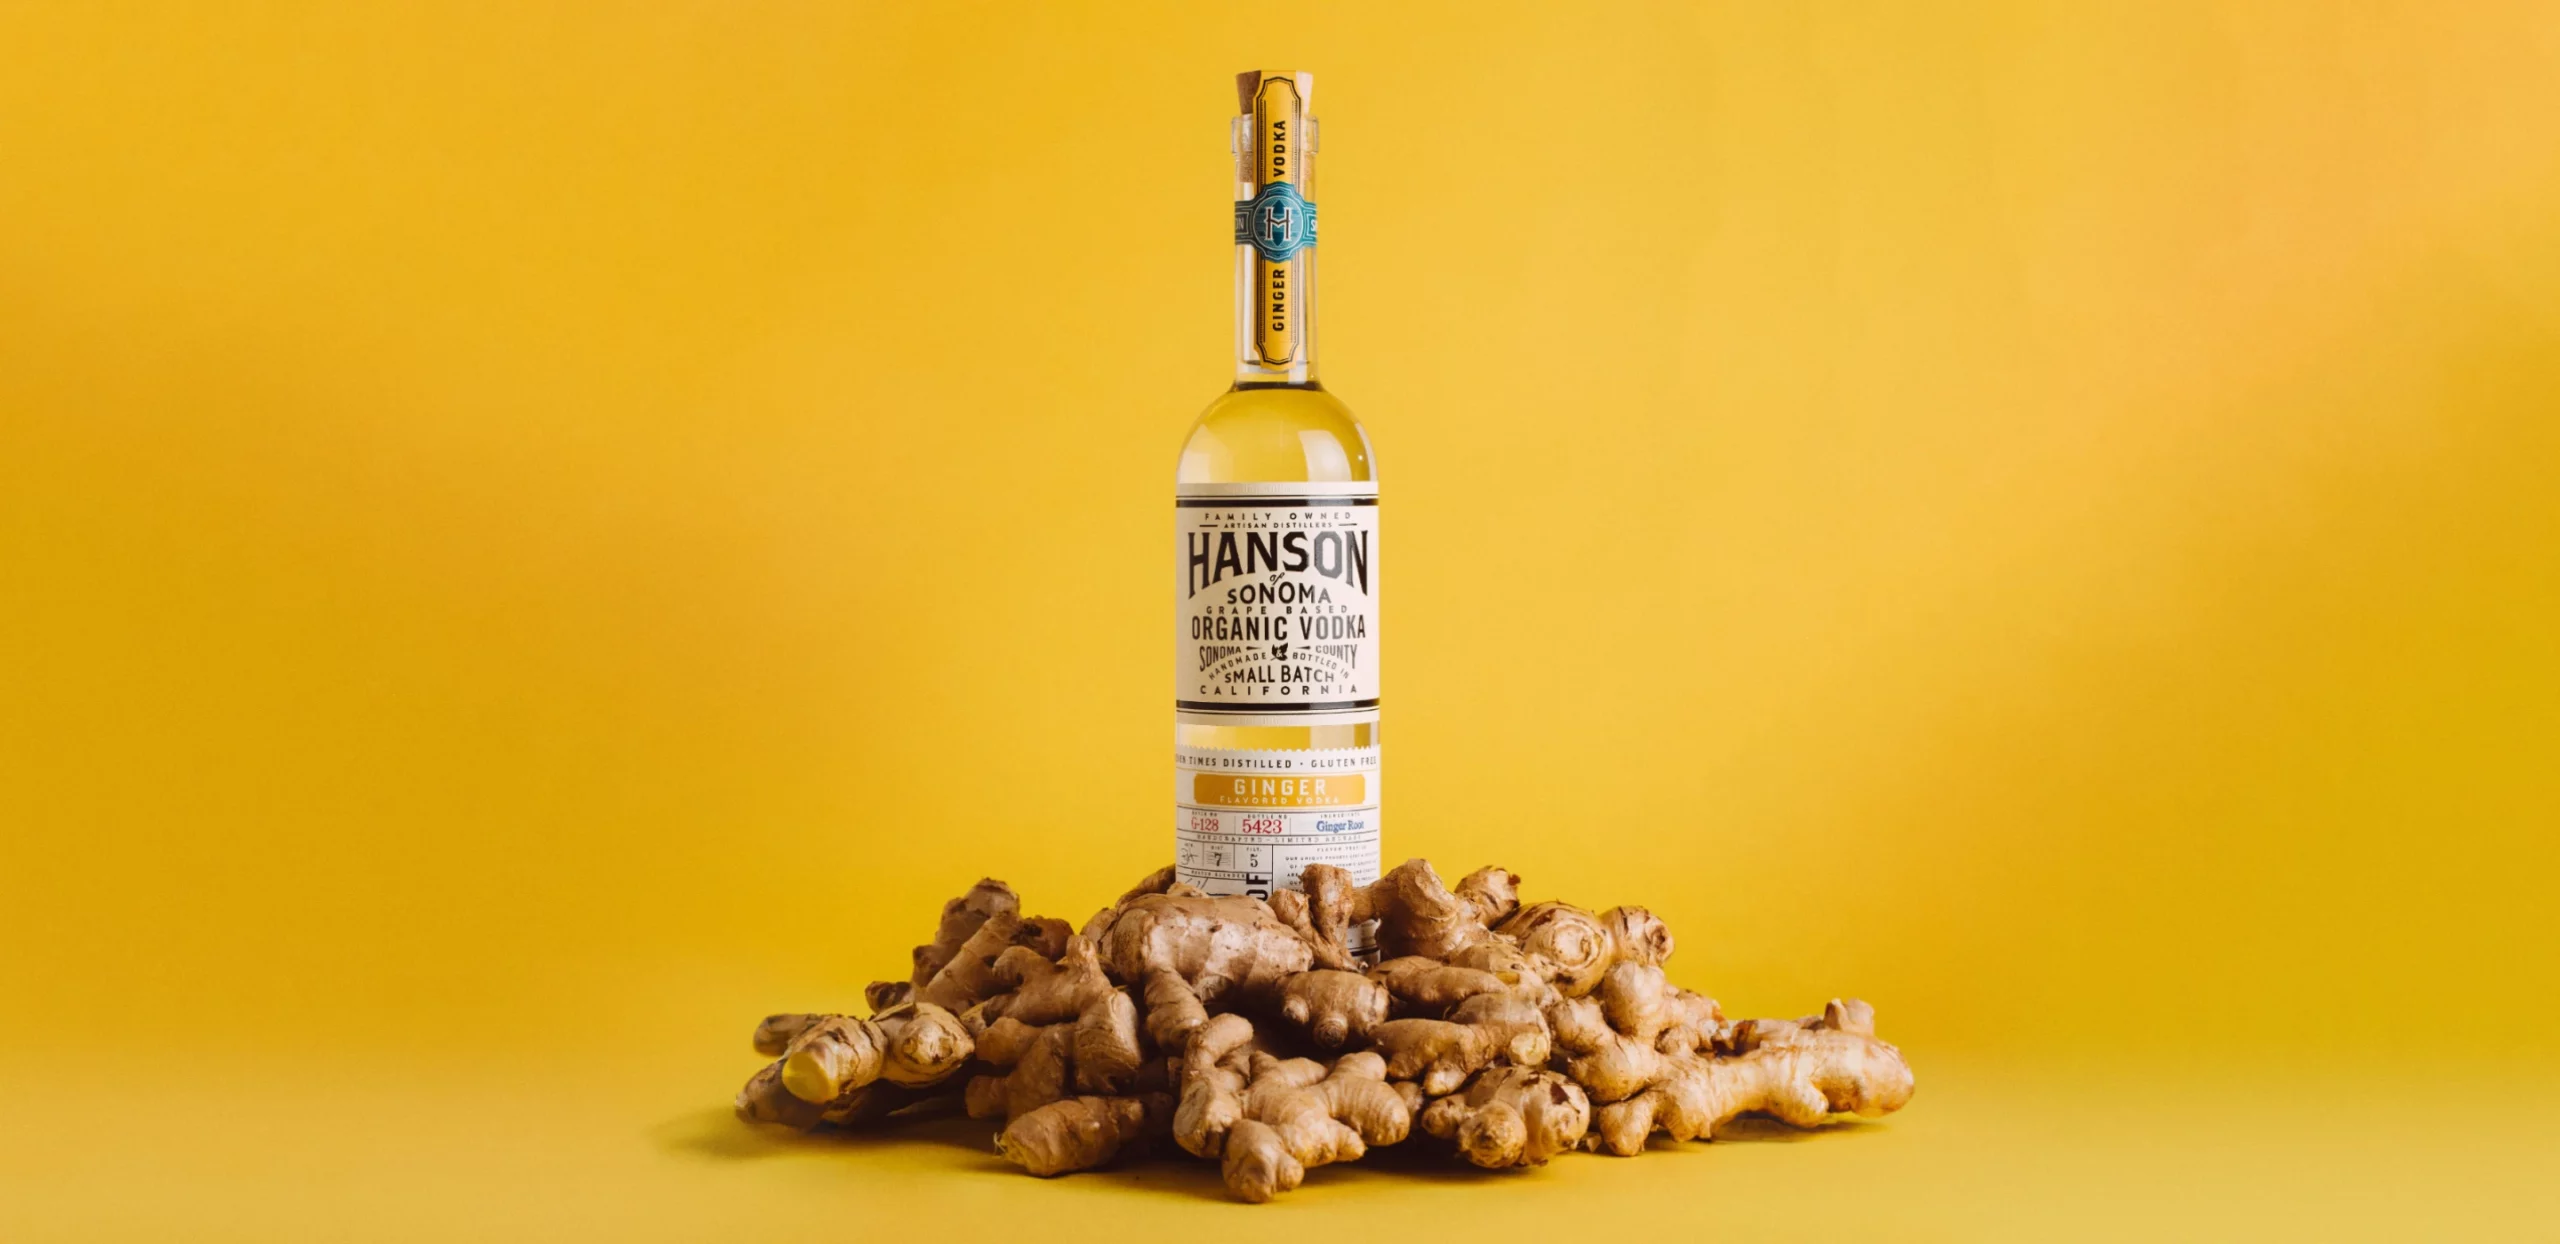 Hanson ginger vodka with ginger pieces on a yellow background, link to blog post article by Robb Report about the best bottles of premium vodka to buy right now